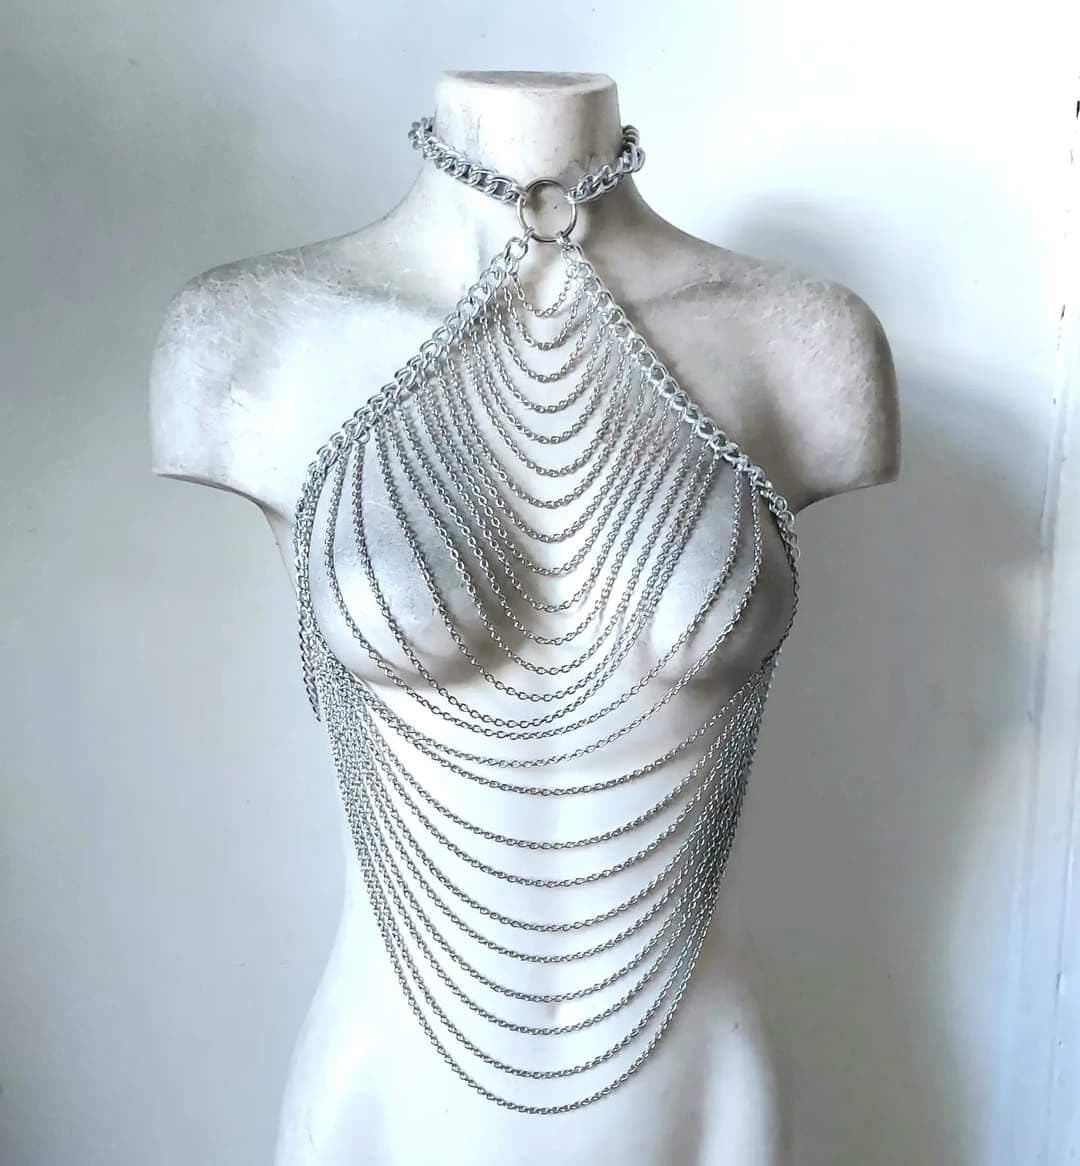 Warrior Draped Necklace Chain Harness